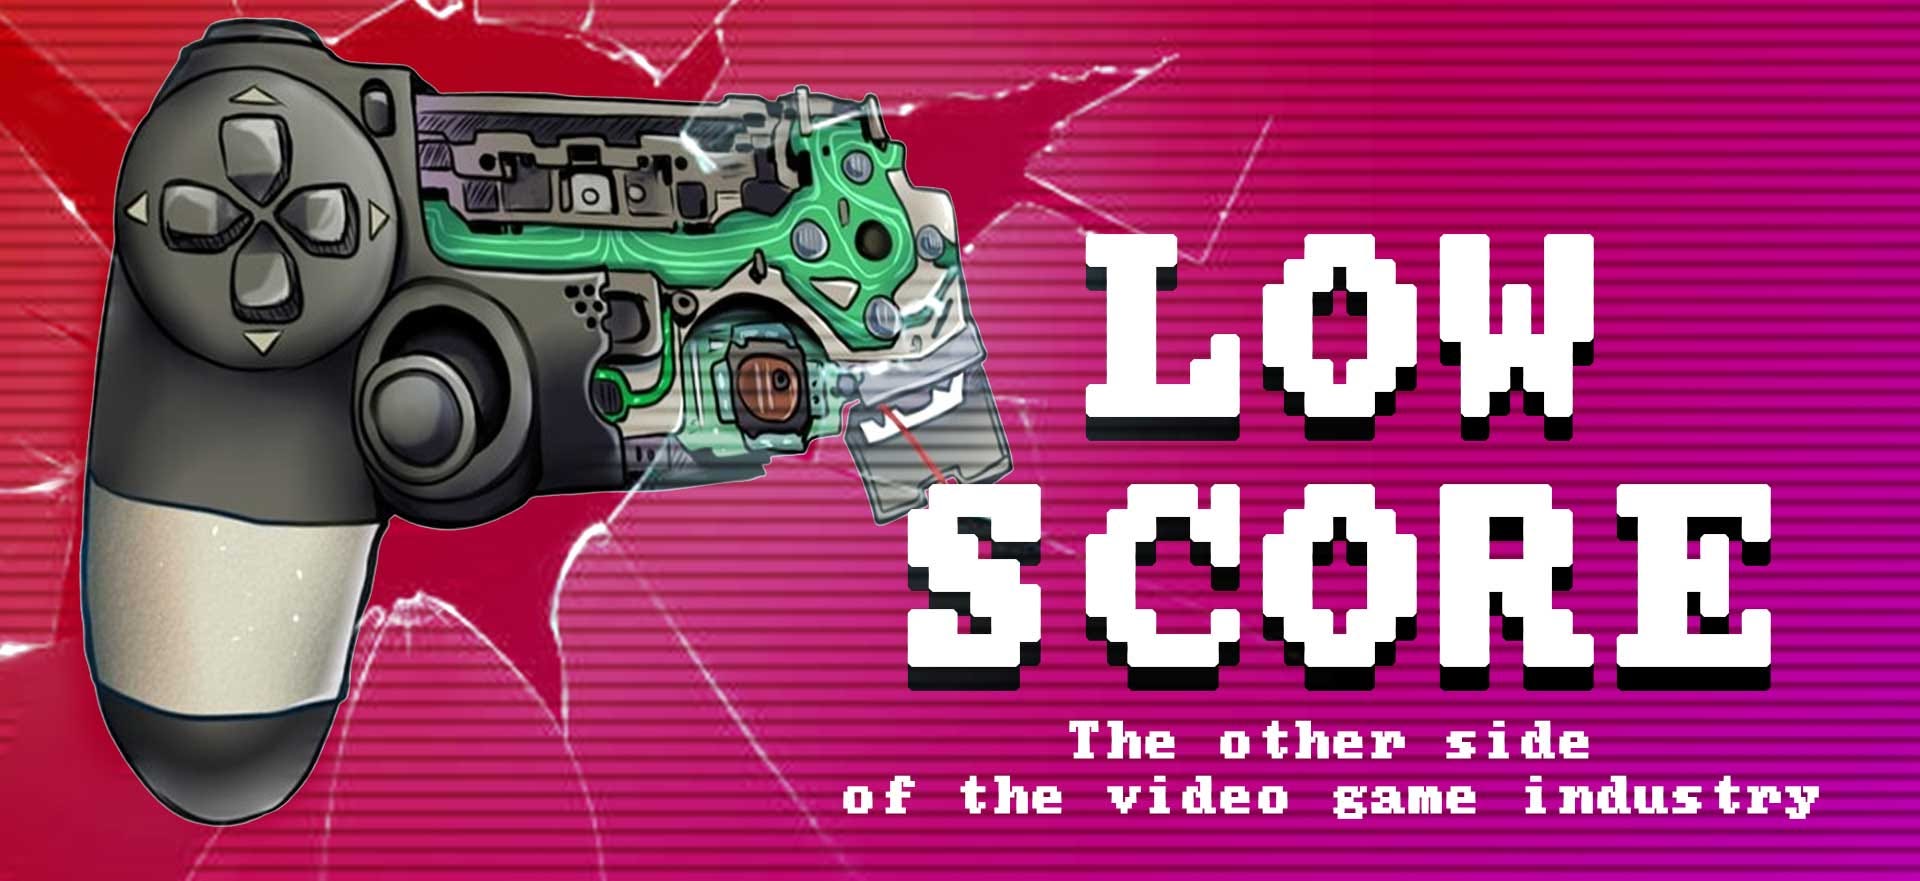 Low Score A Documentary About The Other Side Of The Video Game Industry By Felipe Pepe Sep 2020 Medium - nao stupid questions green roblox